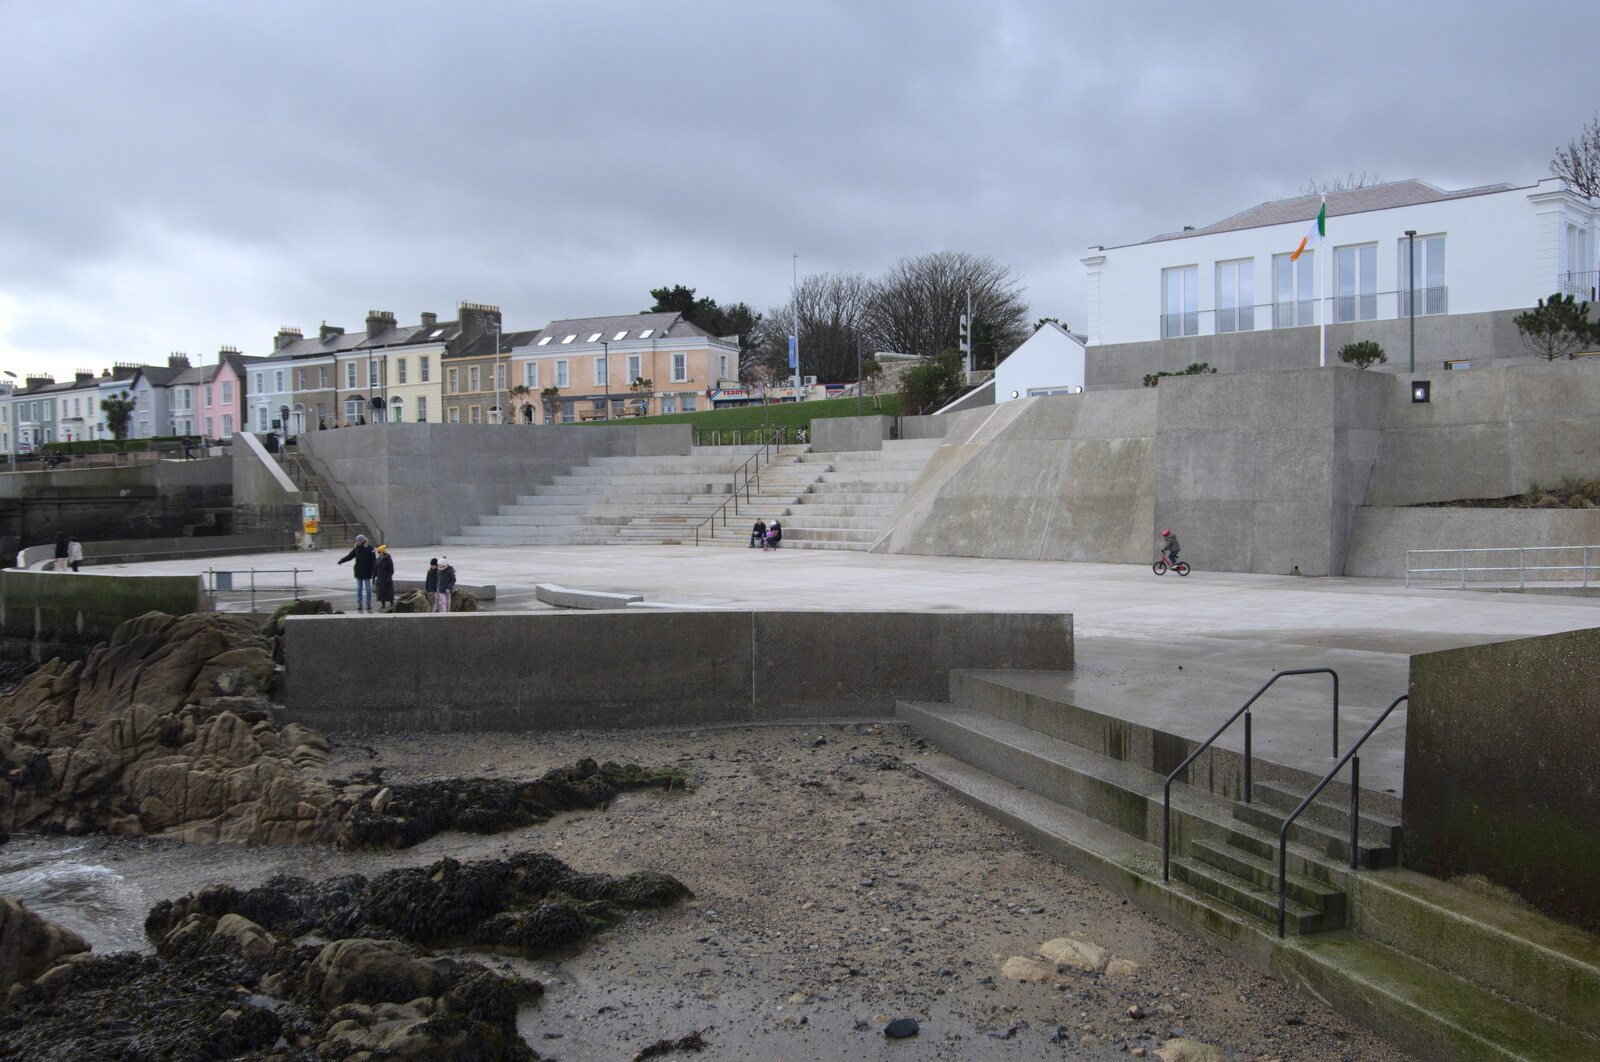 The End of the Breffni, Blackrock, Dublin - 18th February 2023: The new Dun Laoghaire swimming area